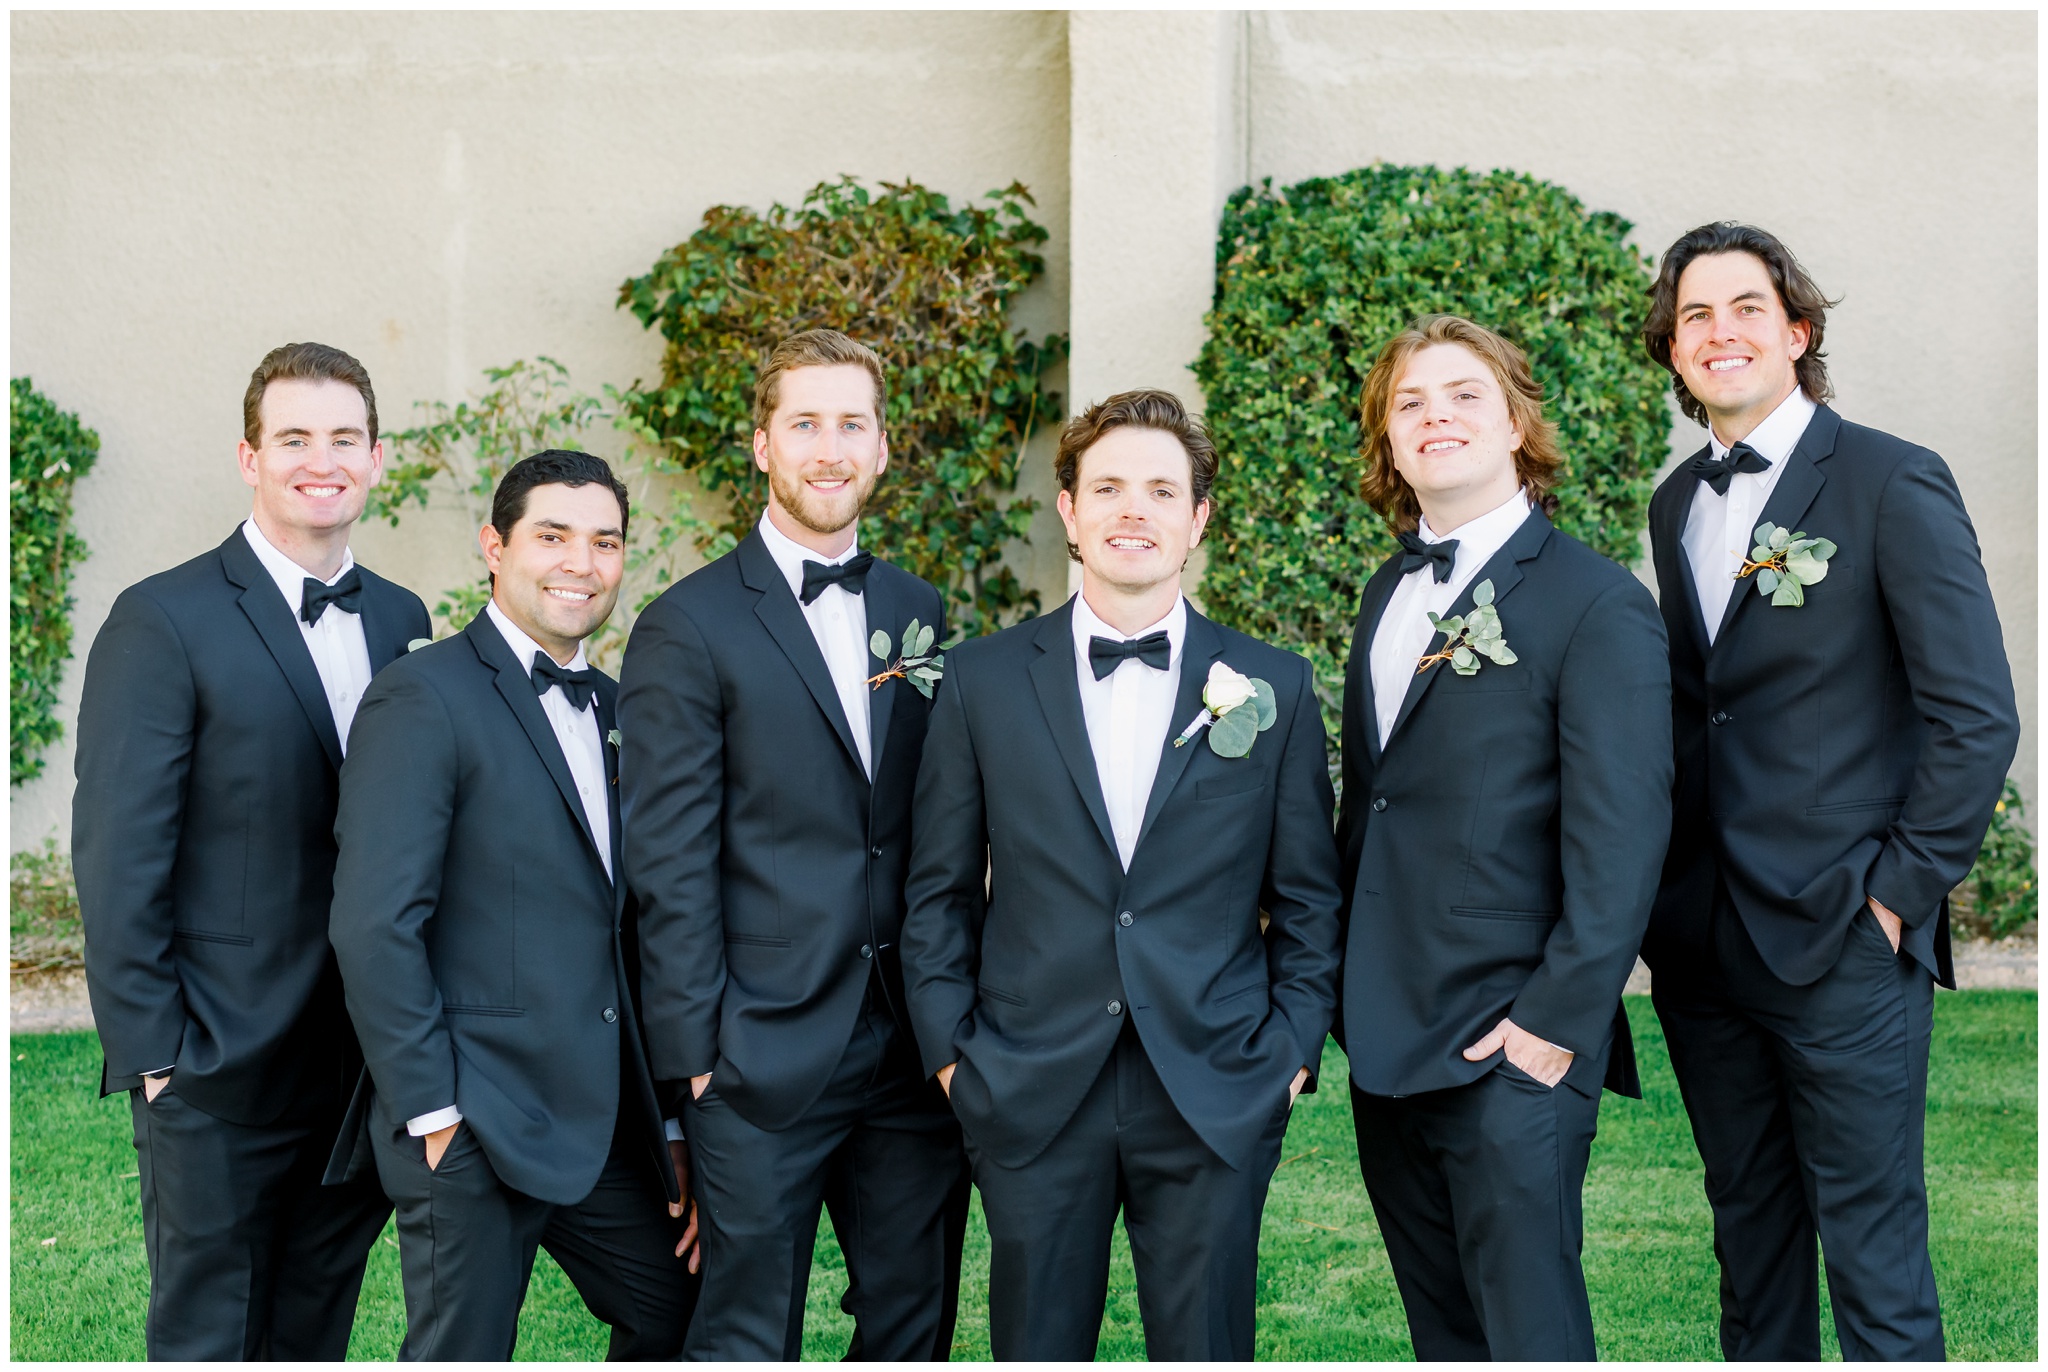 Groom with groomsmen walking at Gainey ranch in black tuxedos